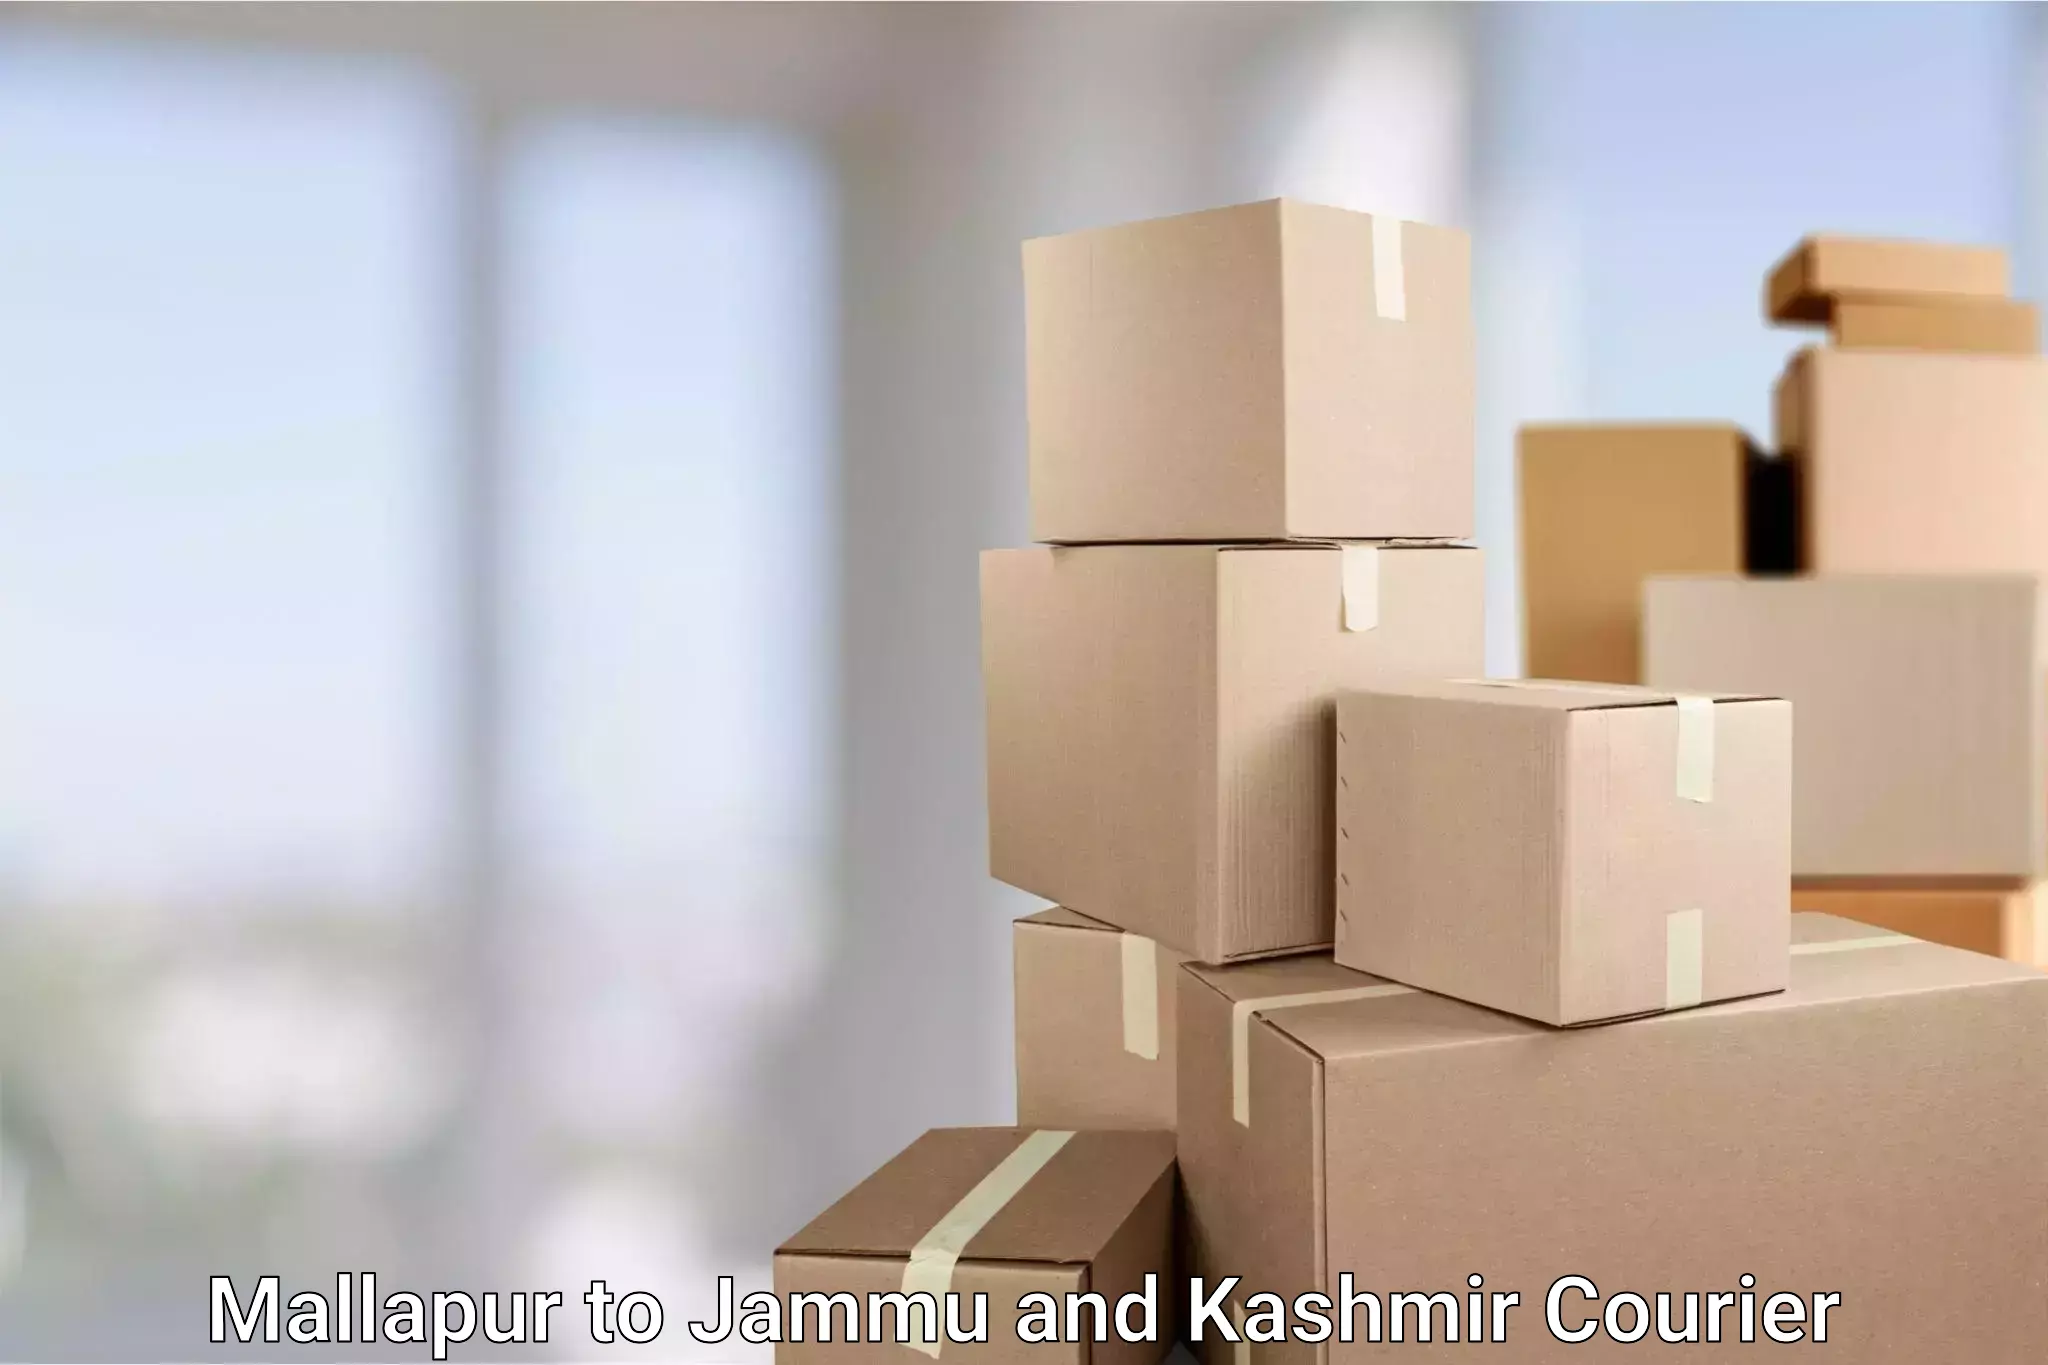 State-of-the-art courier technology Mallapur to IIT Jammu